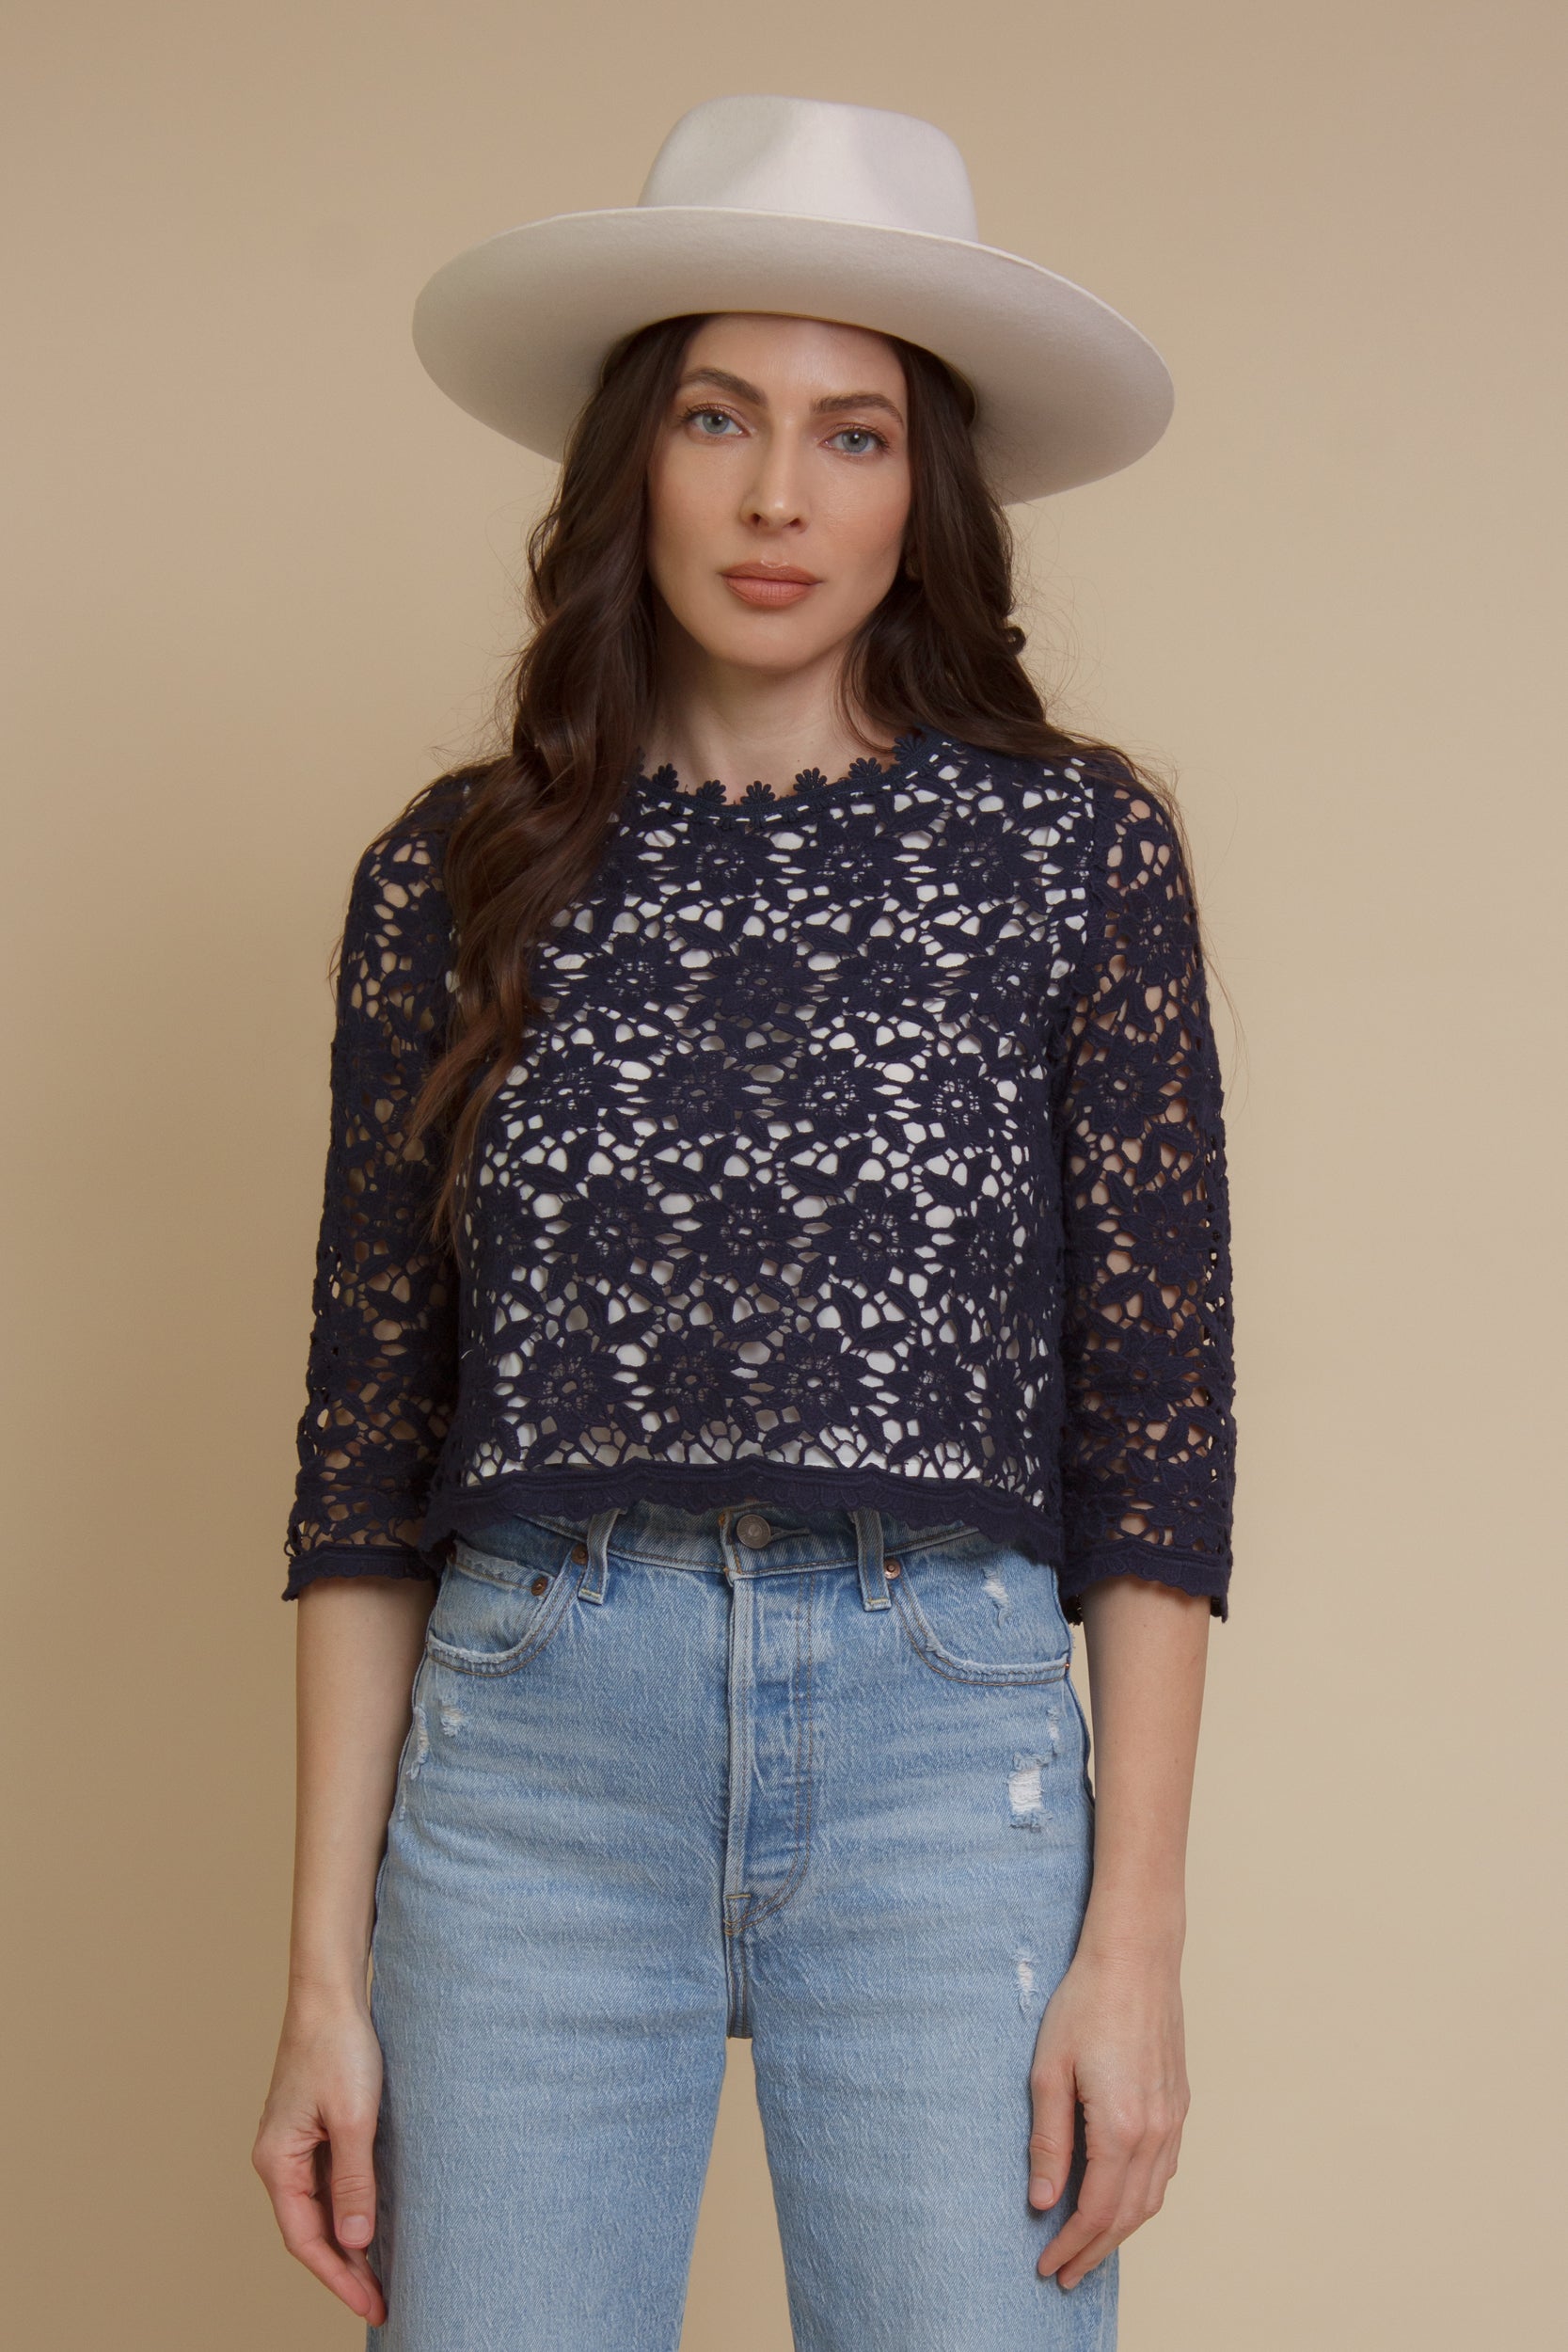 Cropped lace blouse, in navy.